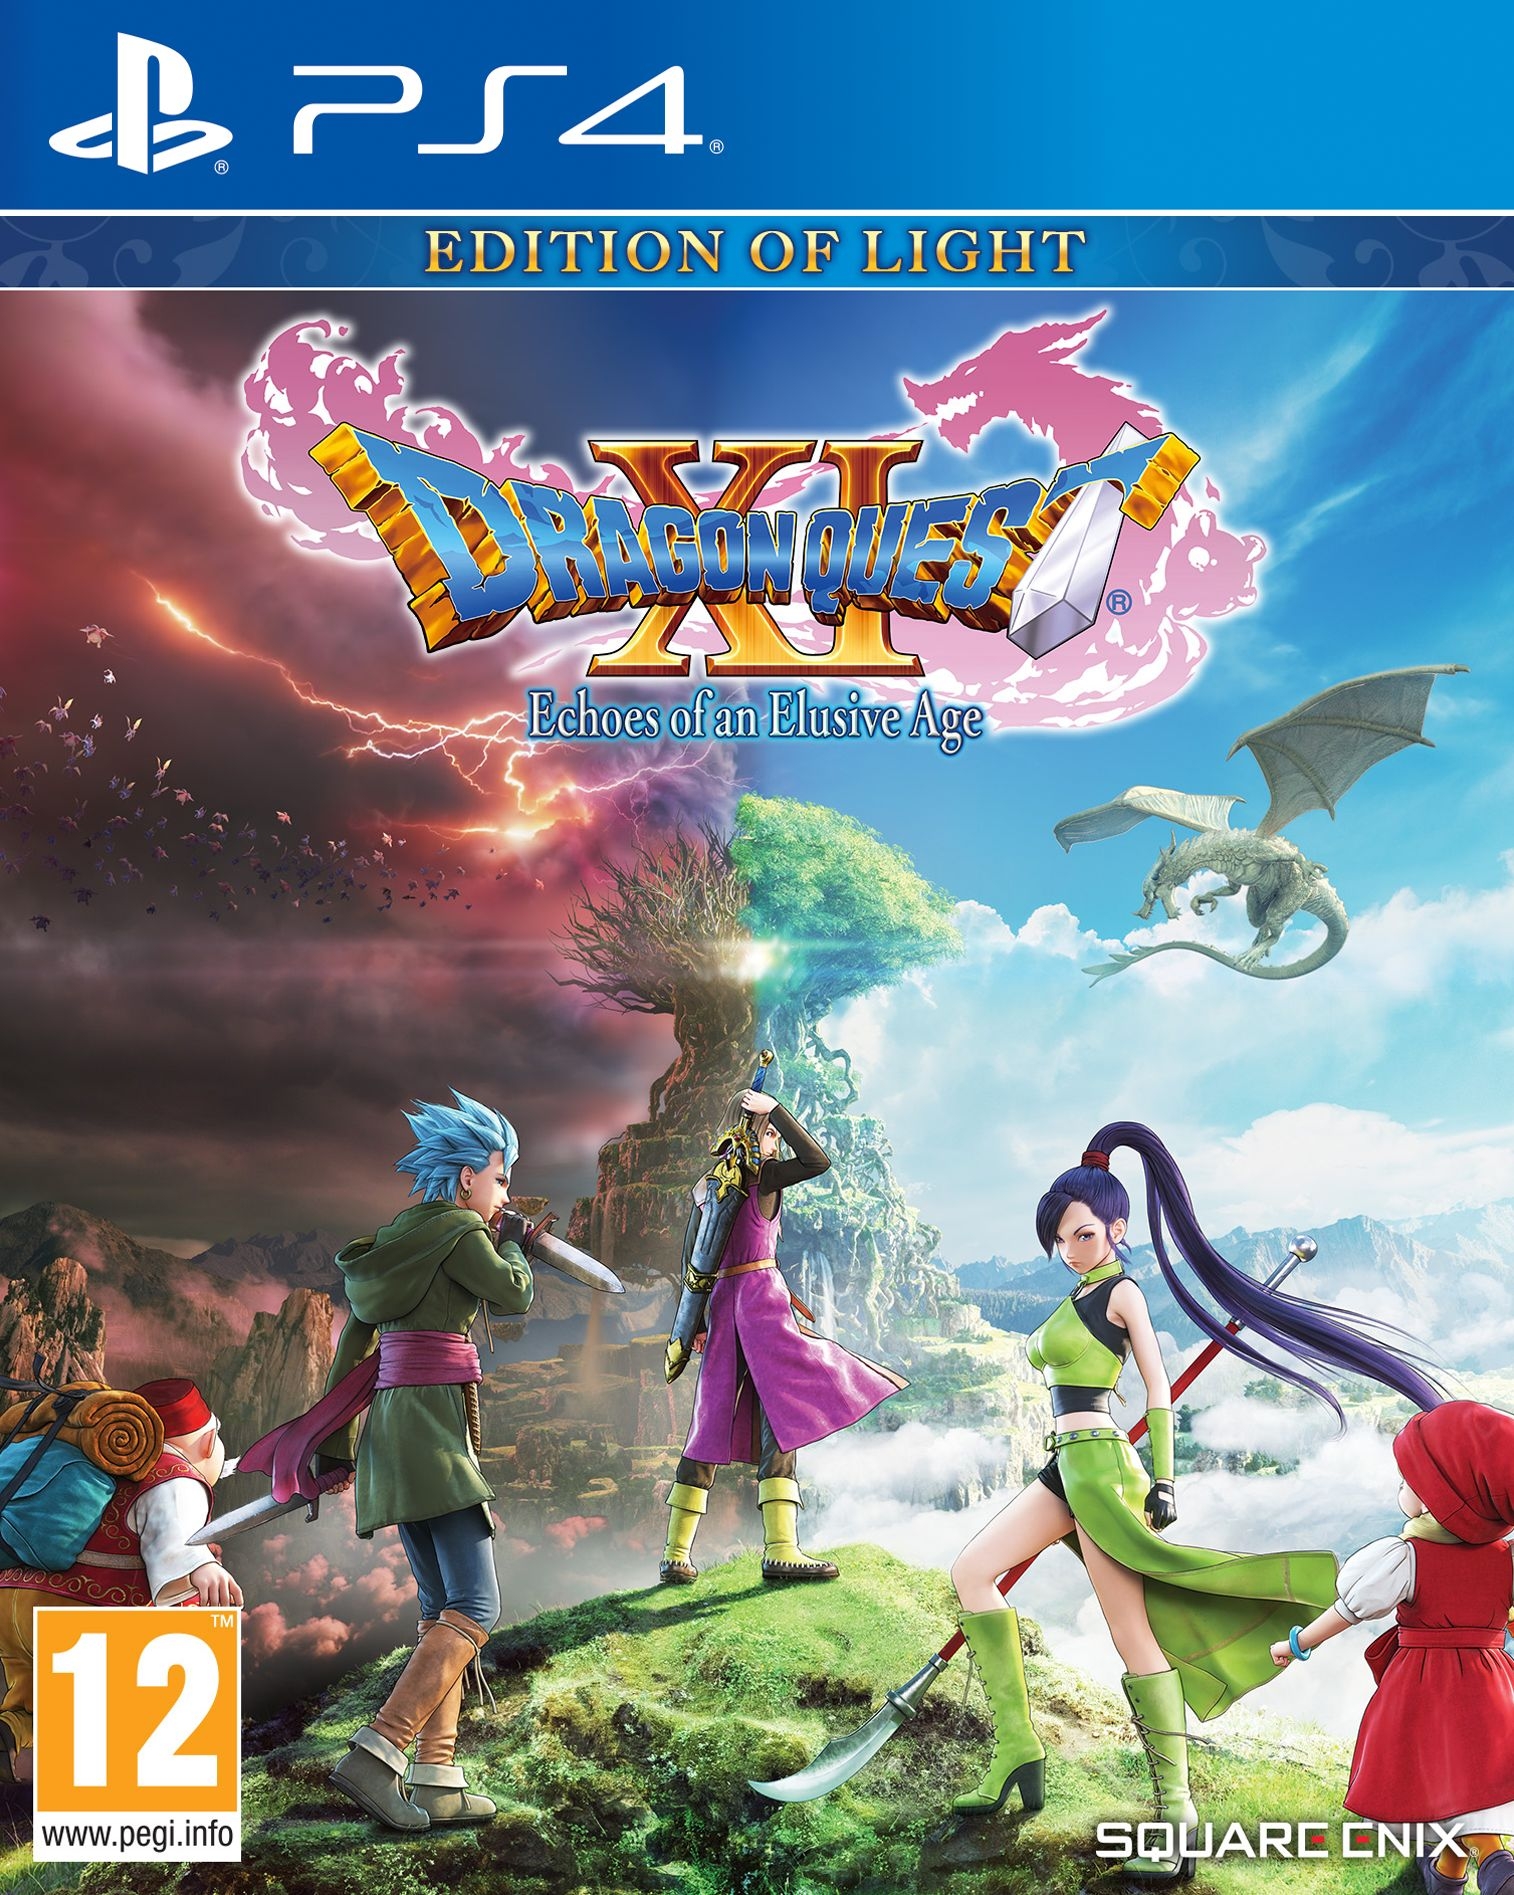 PS4 Dragon Quest XI: Edition of Light